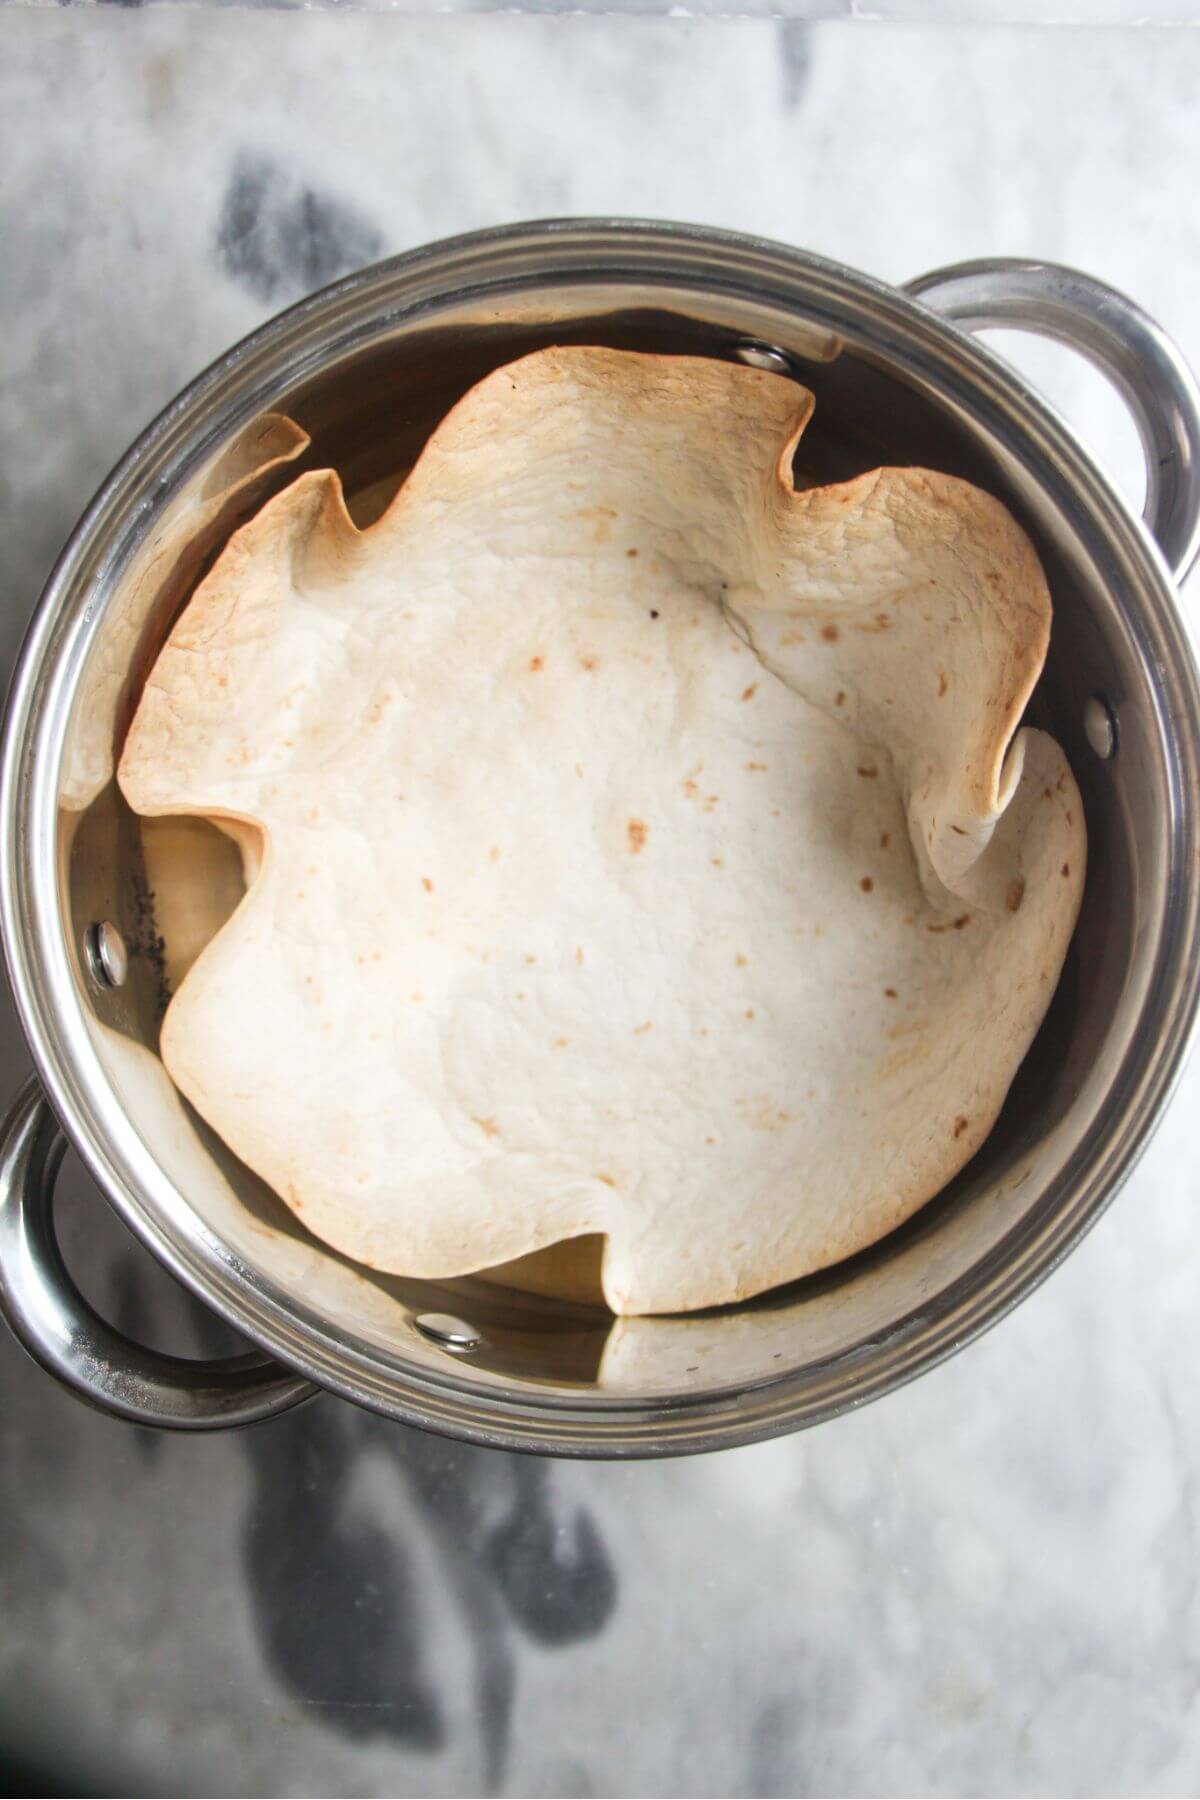 Crispy tortilla shell in a small silver pot on a grey marble background.